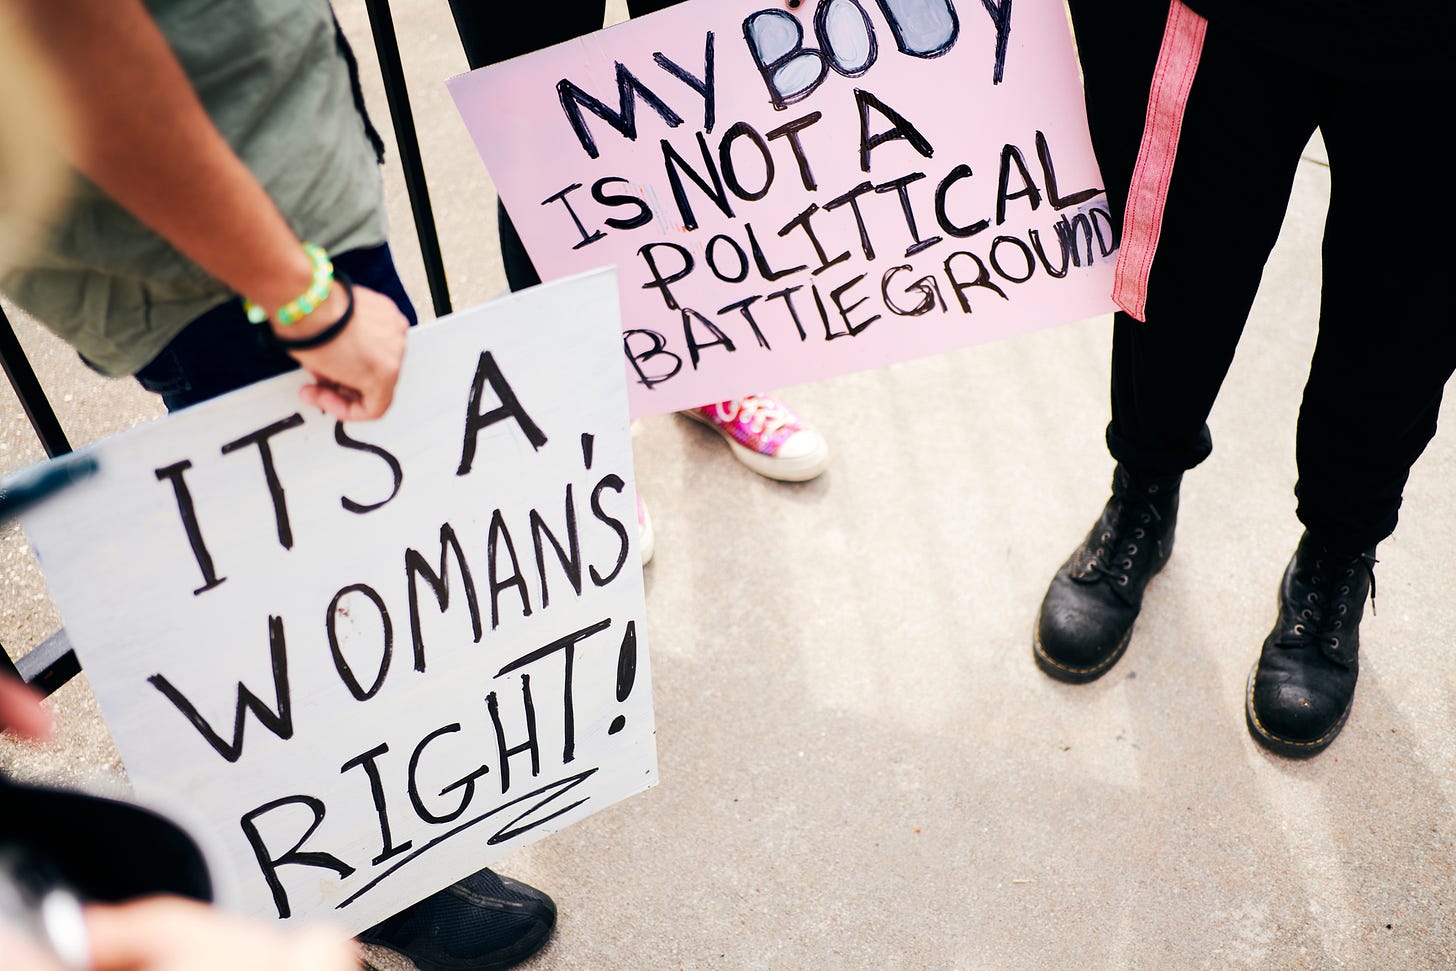 Photos of pro-choice signs: "It's a woman's right!" and "My body is not a political battleground"